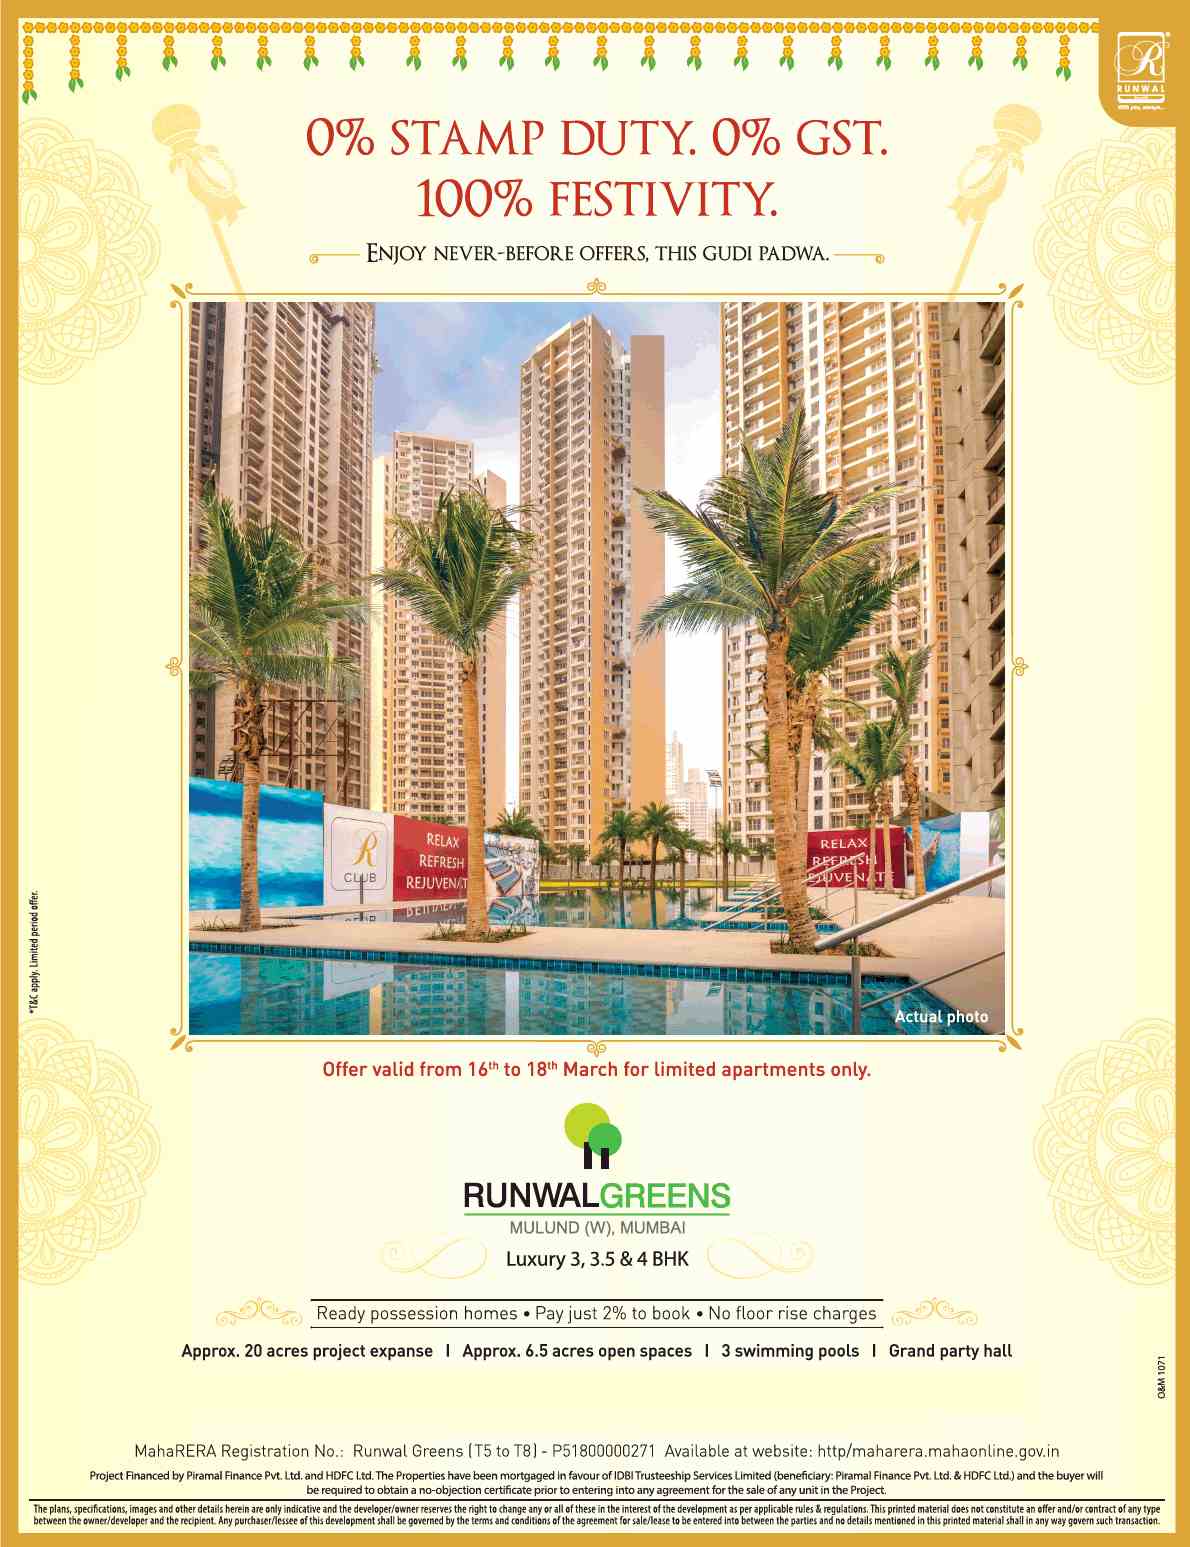 Pay just 2% to book ready possession homes at Runwal Greens in Mumbai Update